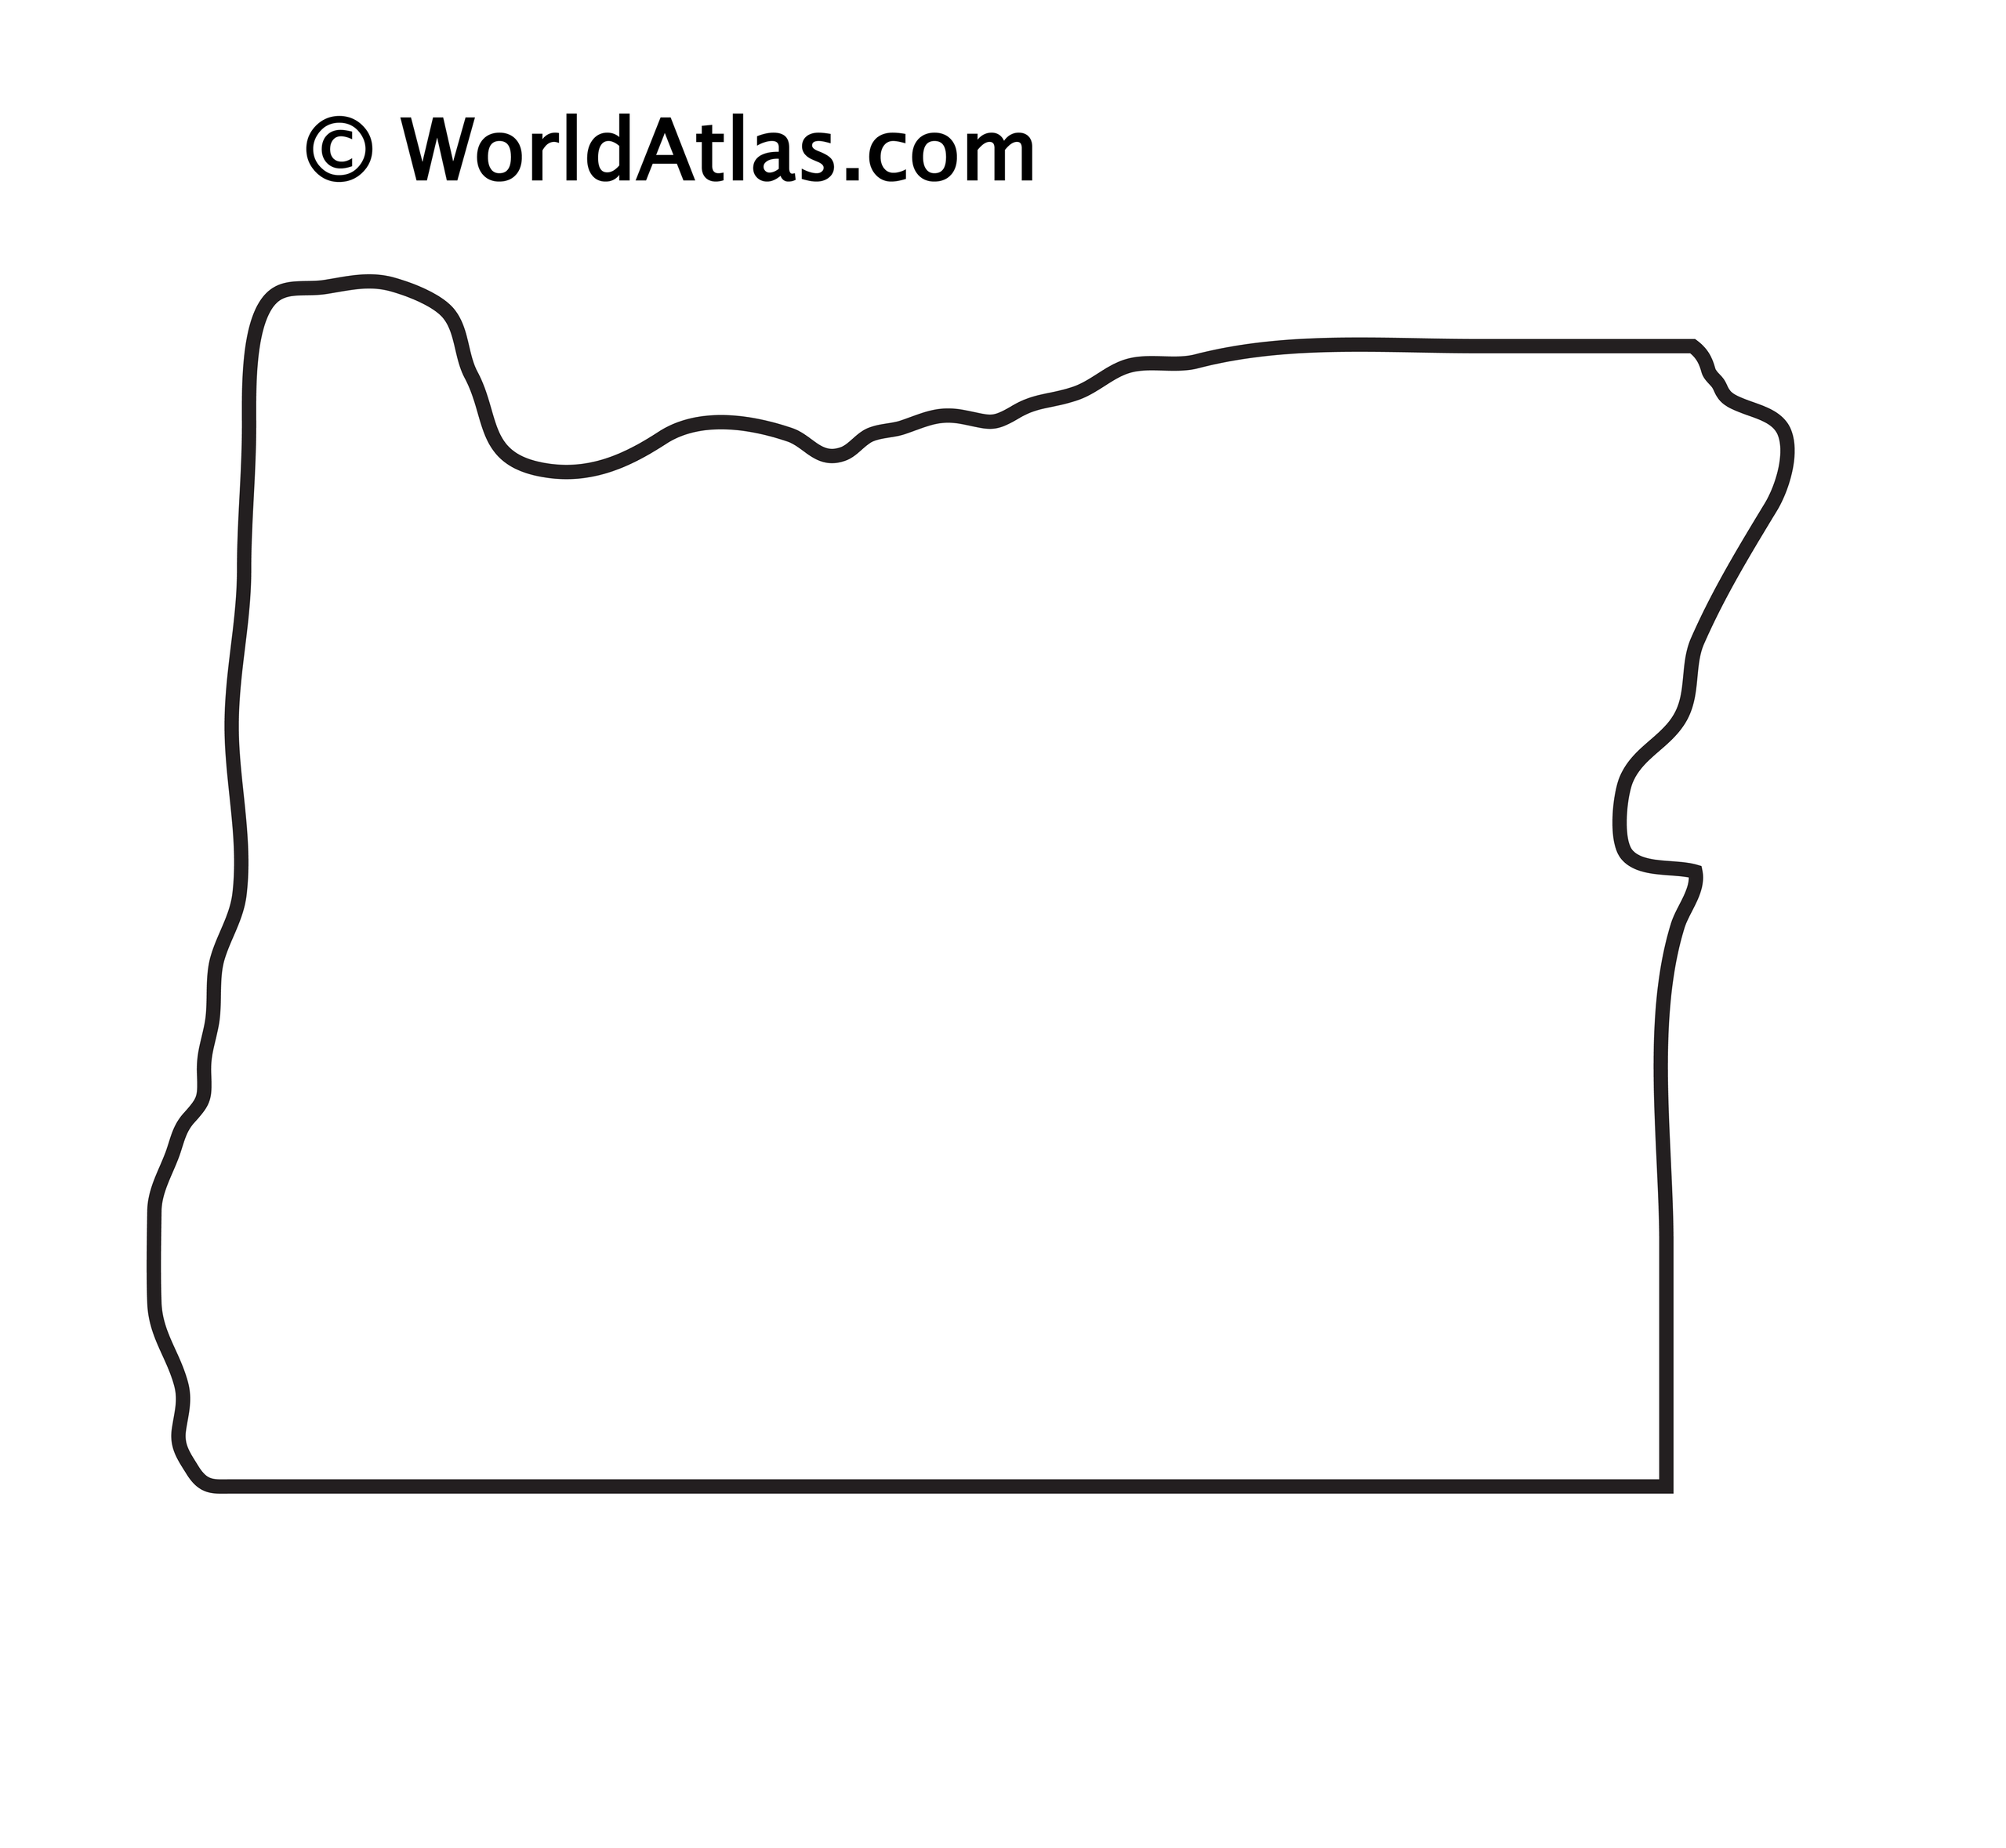 Geographic Facts About Oregon